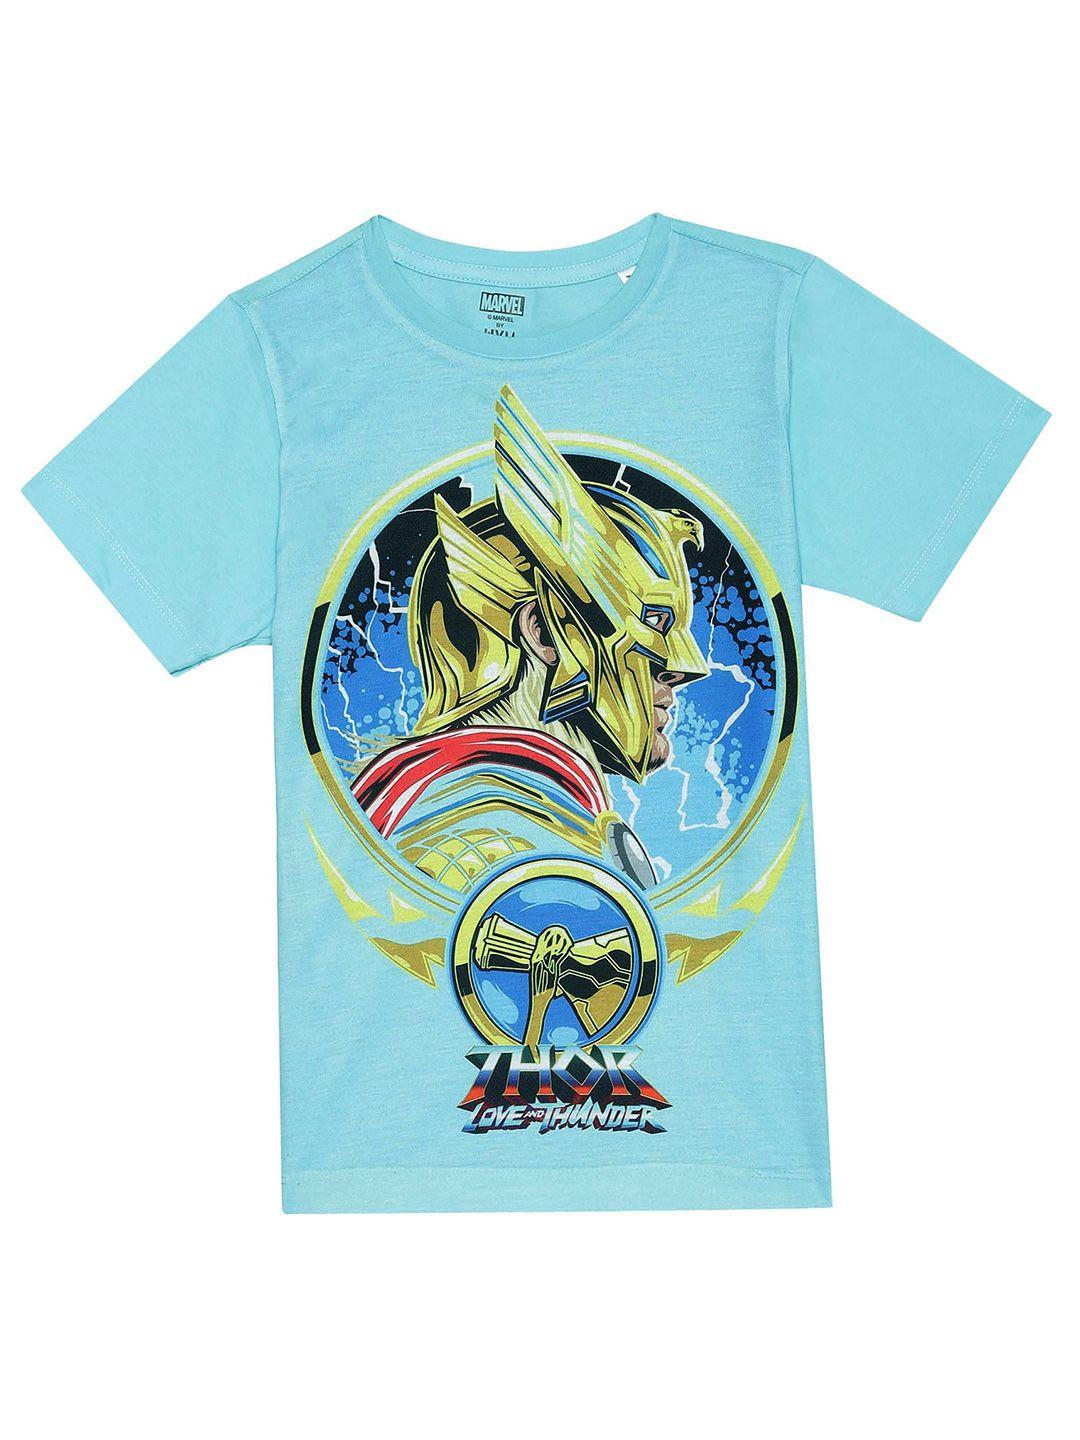 marvel by wear your mind boys blue printed applique outdoor t-shirt 60% cotton